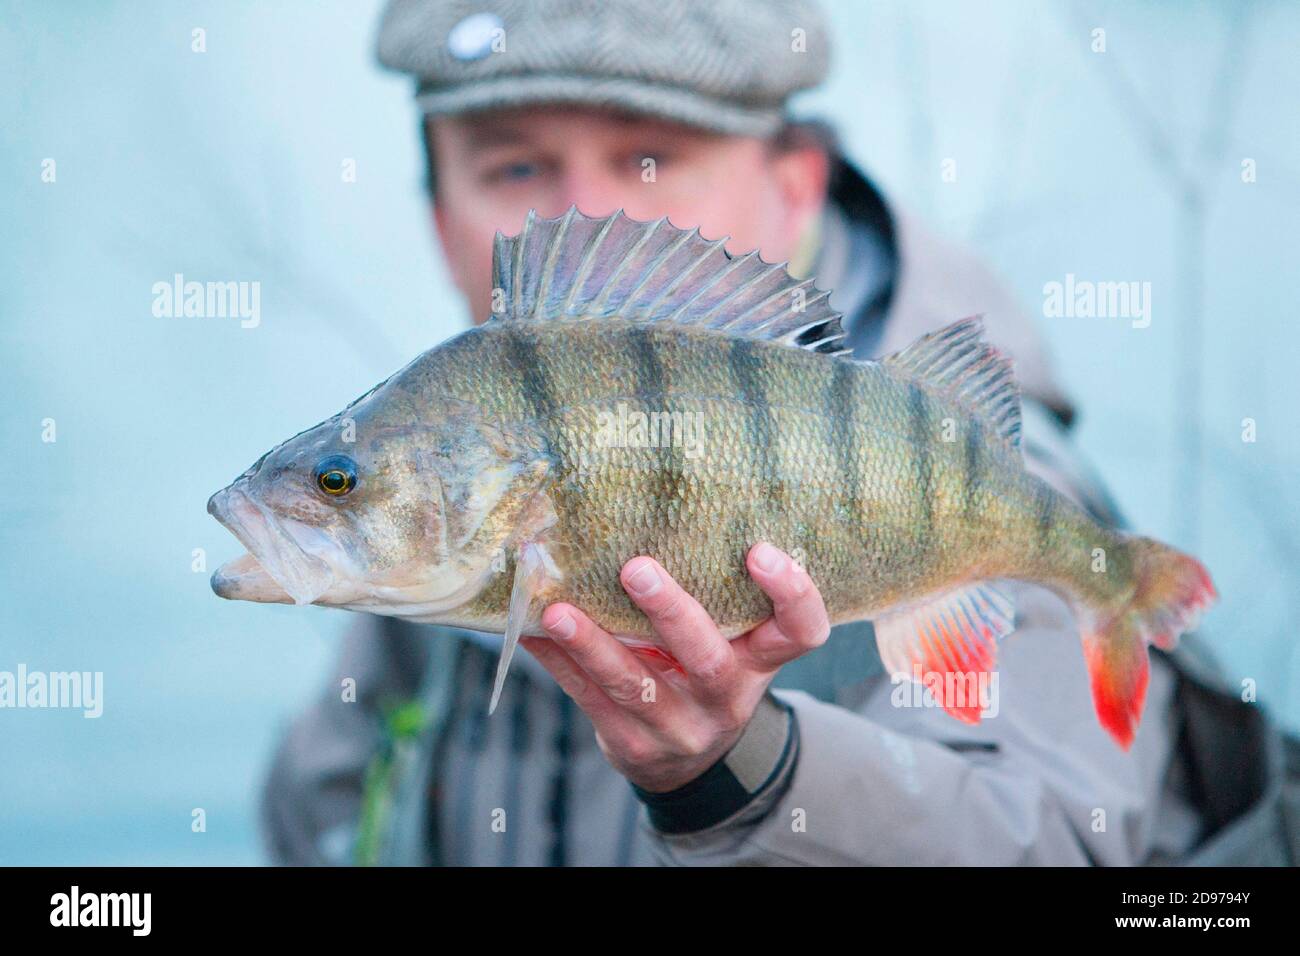 Catch of a large Perch (Perca fluviatilis) in fishing, Doubs, Franche-Comte, France Stock Photo